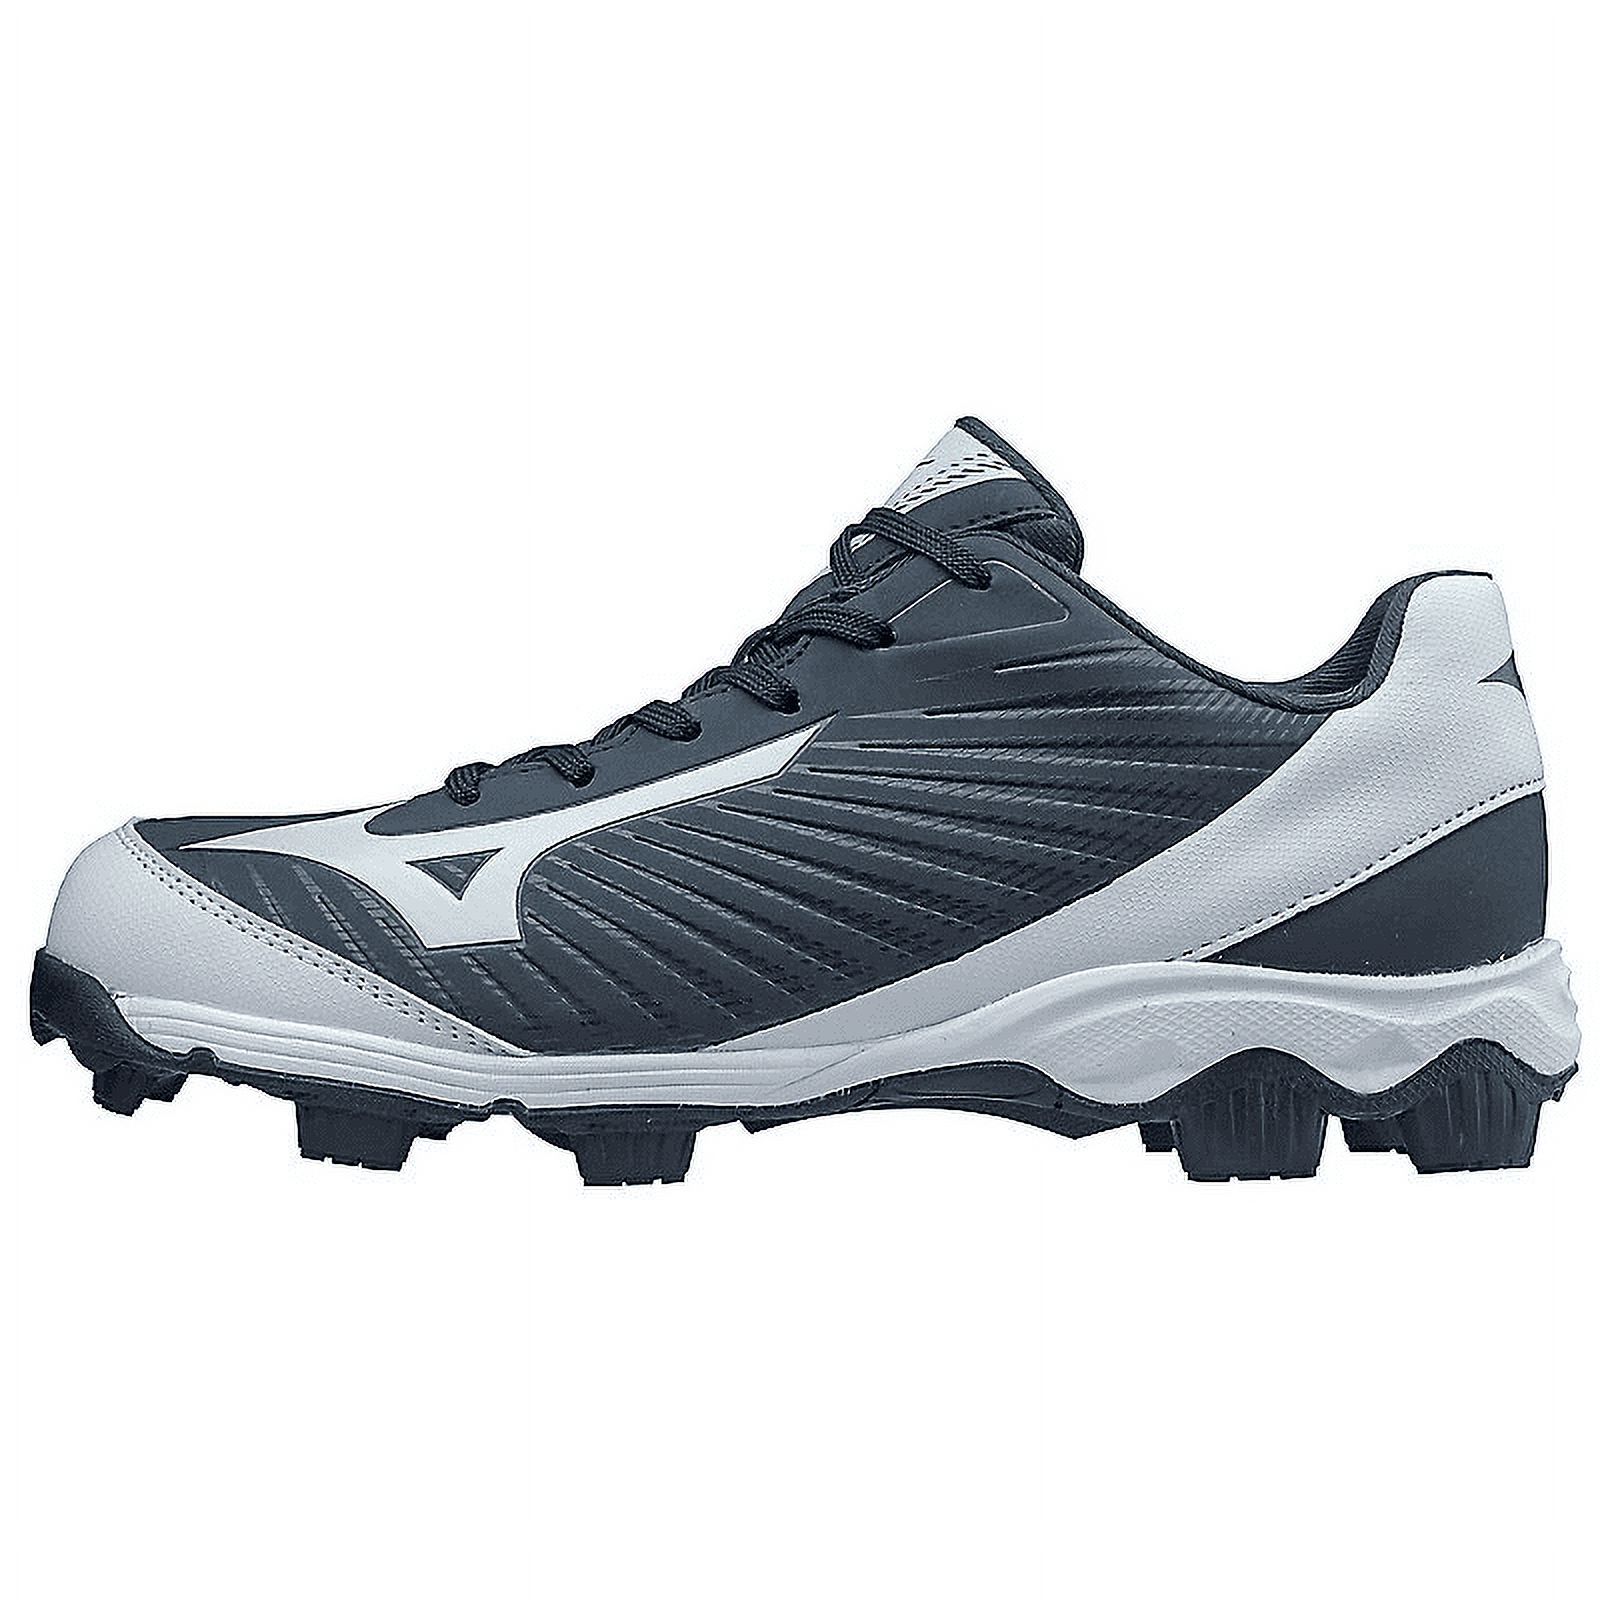 Mizuno 9-Spike Advanced Franchise 9 Low Baseball Cleats Size 11.5 Navy/White - image 1 of 6